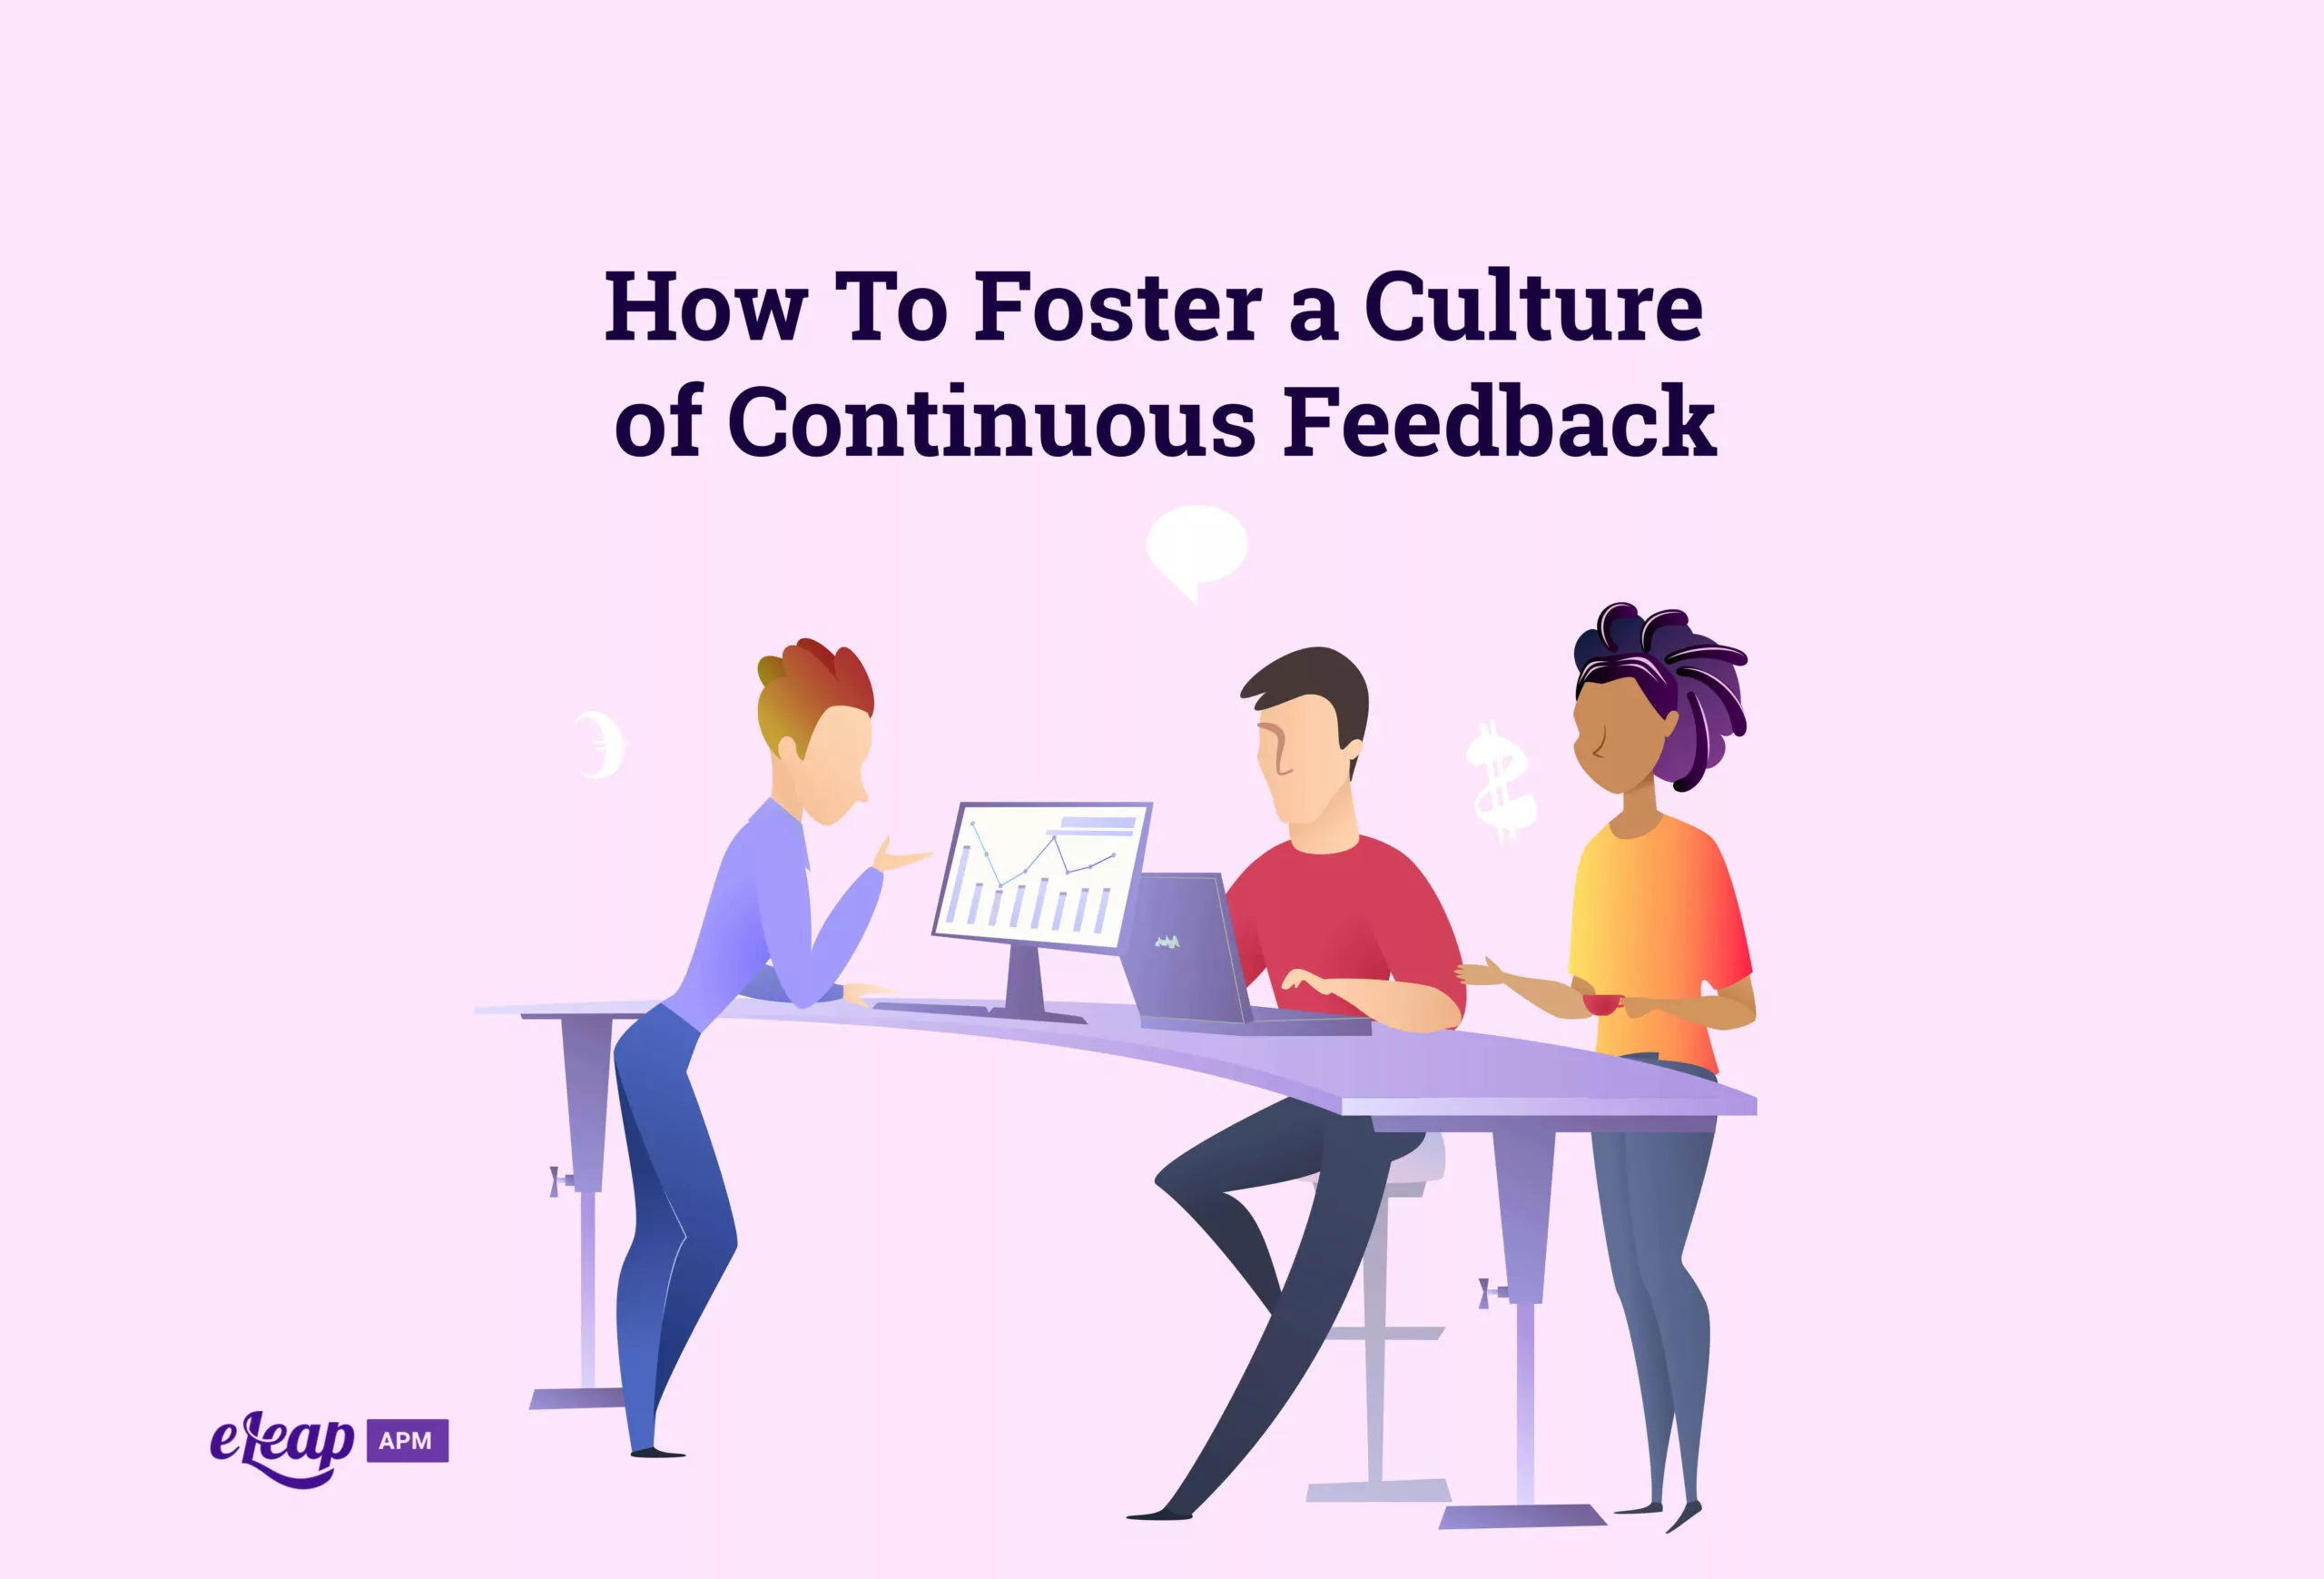 How To Foster a Culture of Continuous Feedback